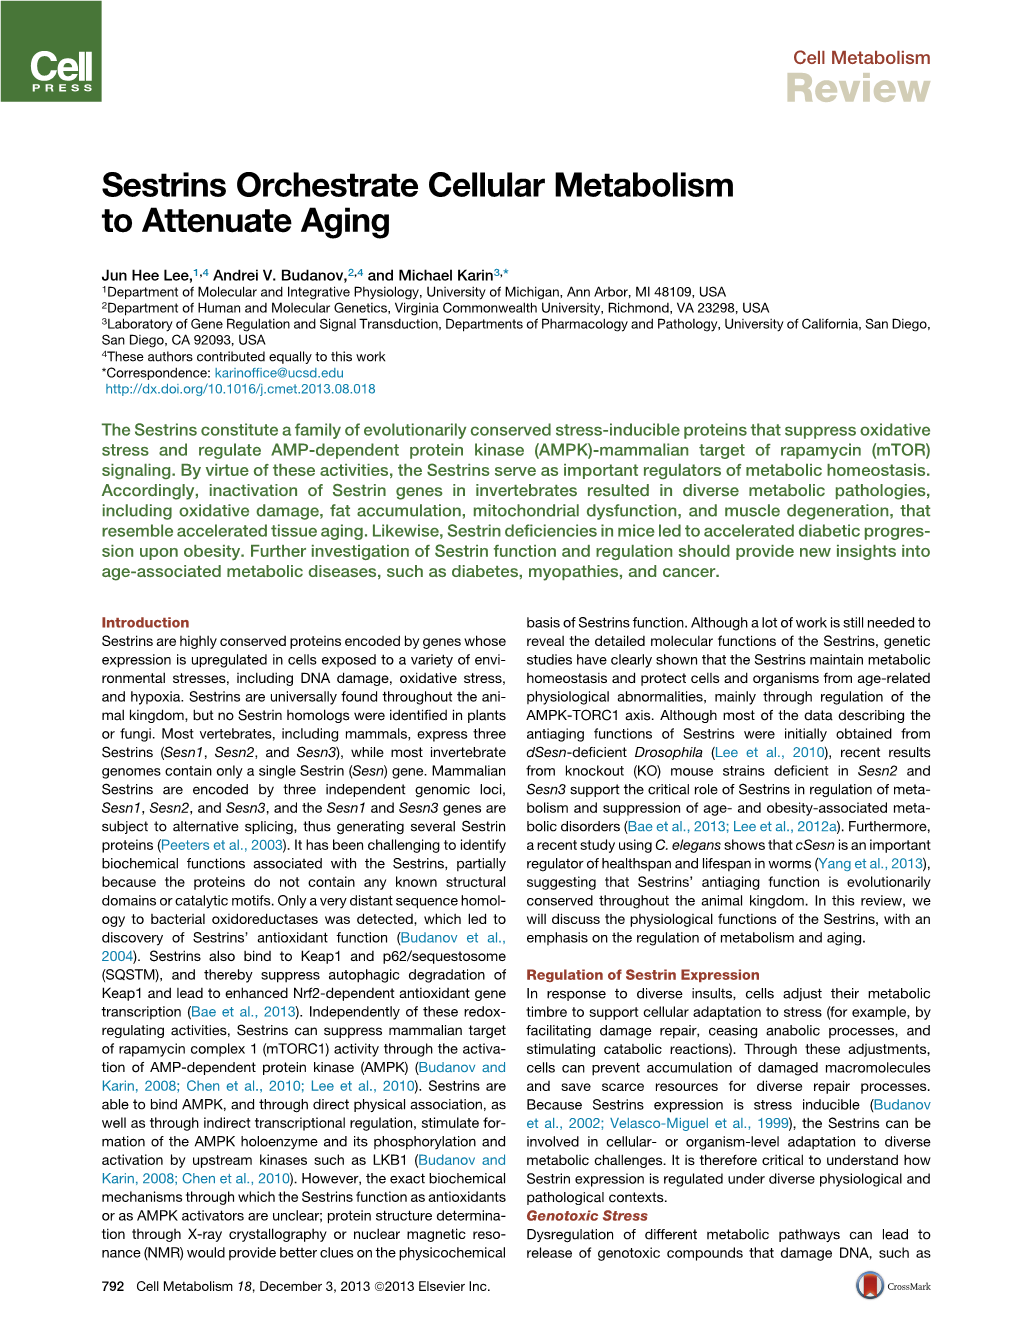 Sestrins Orchestrate Cellular Metabolism to Attenuate Aging